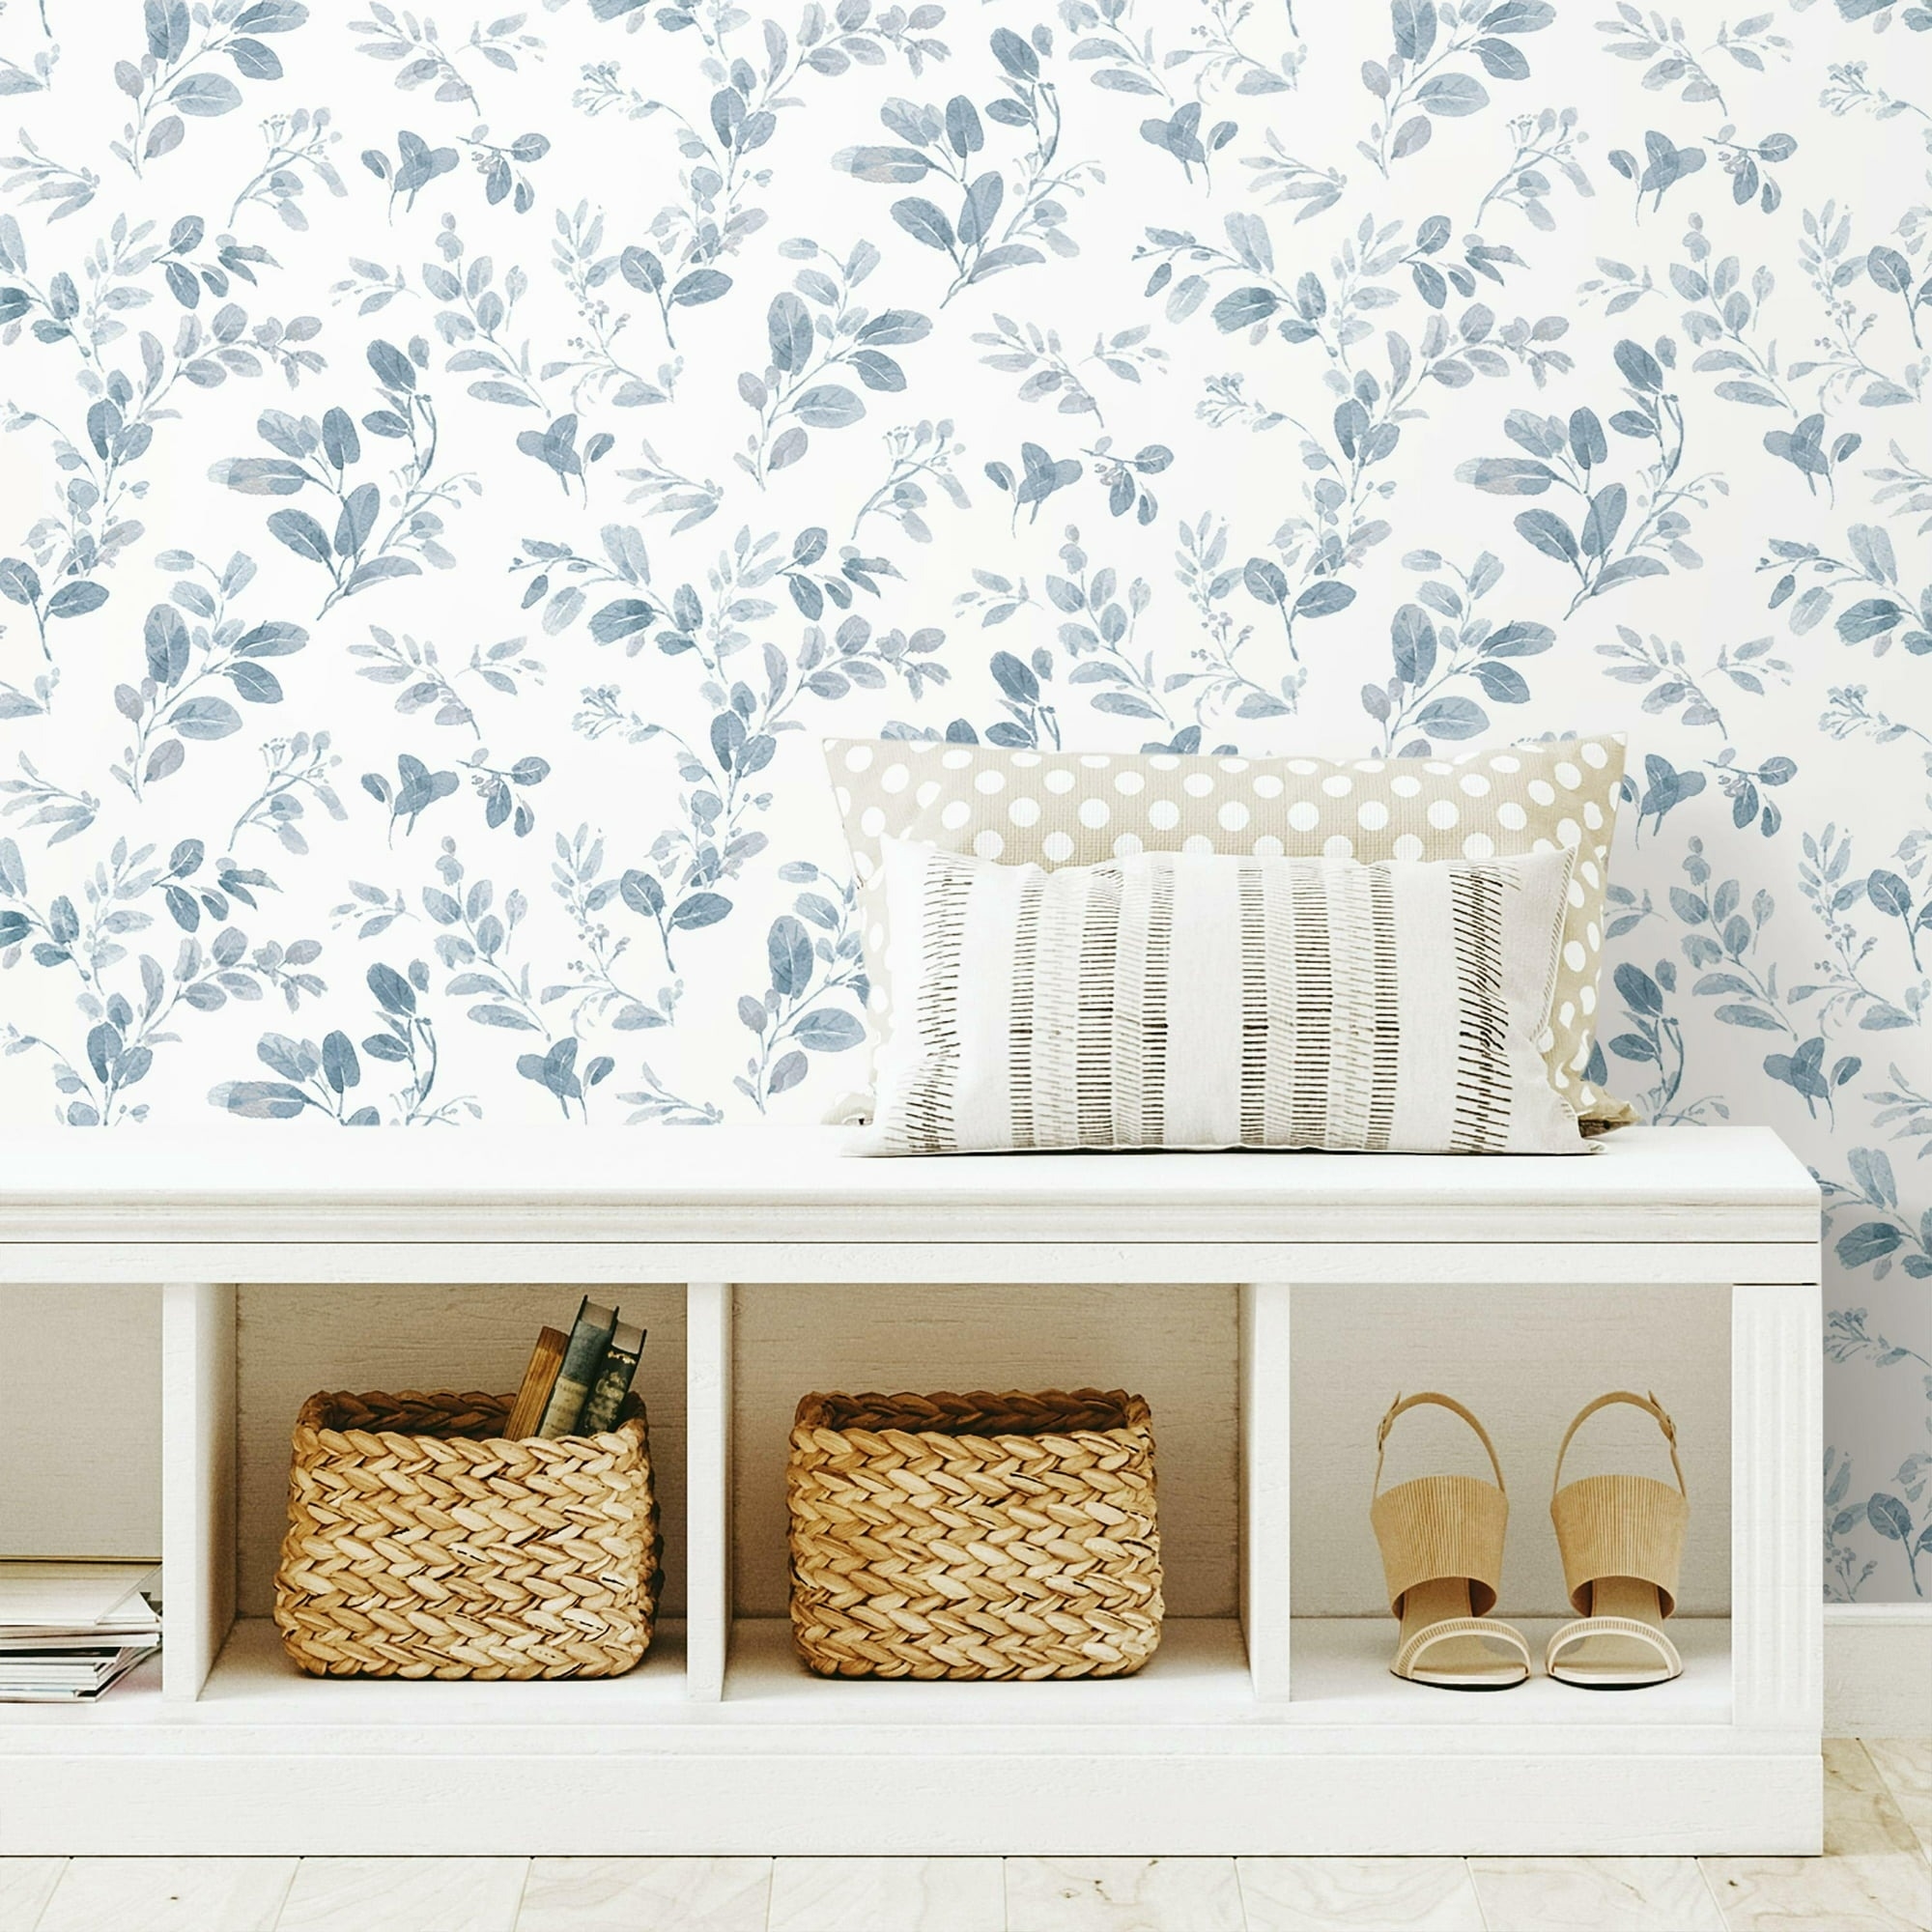 A white bench with storage baskets, books, and cushions against a floral wallpaper